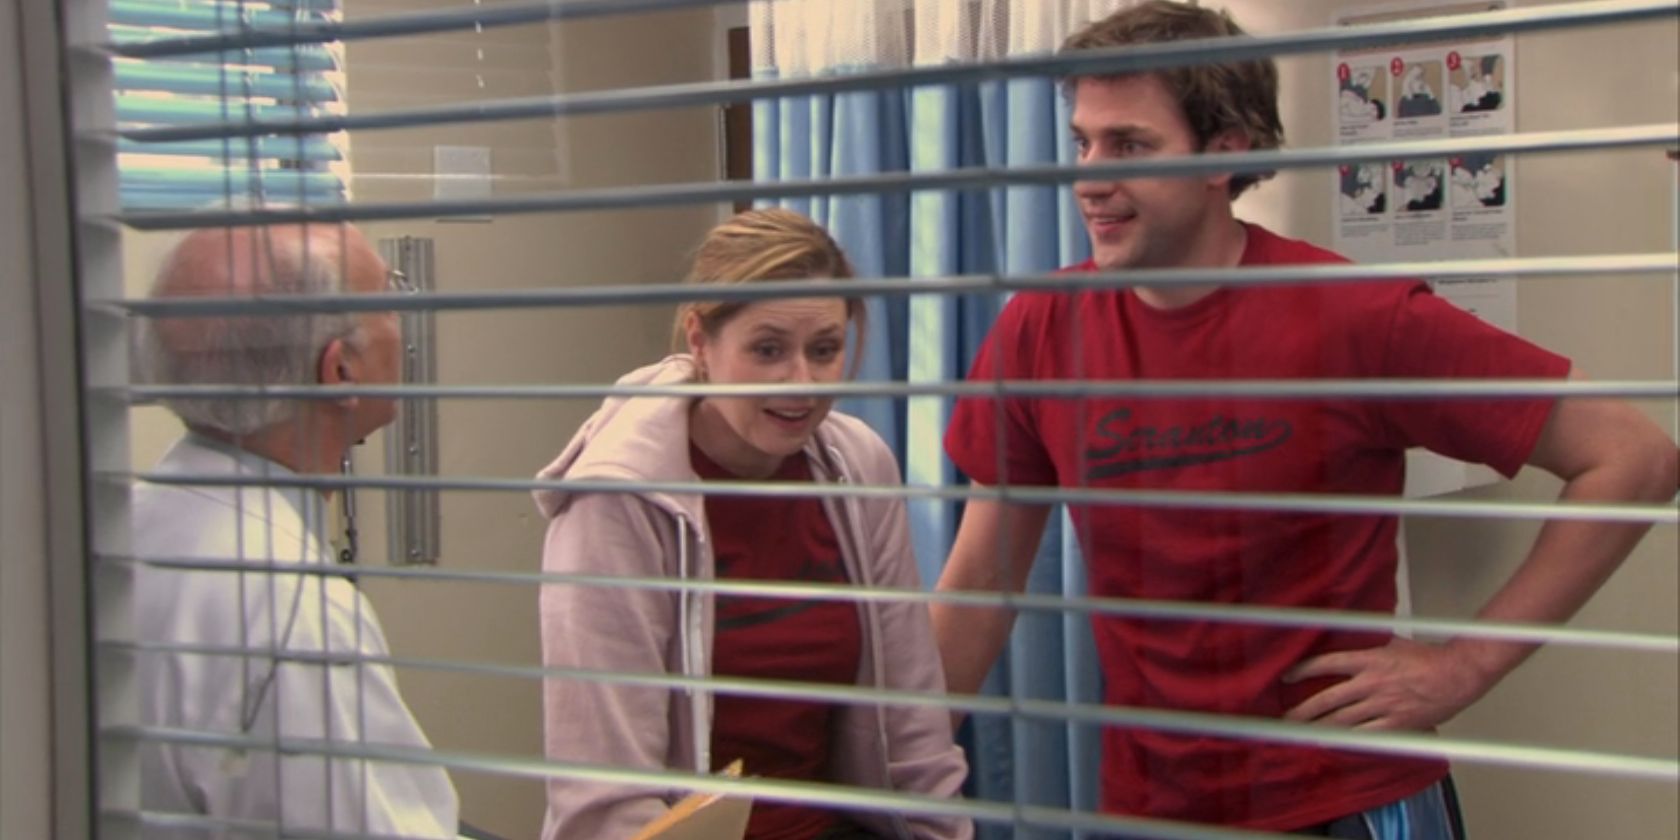 The Office Jim And Pam’s 10 Cutest Moments